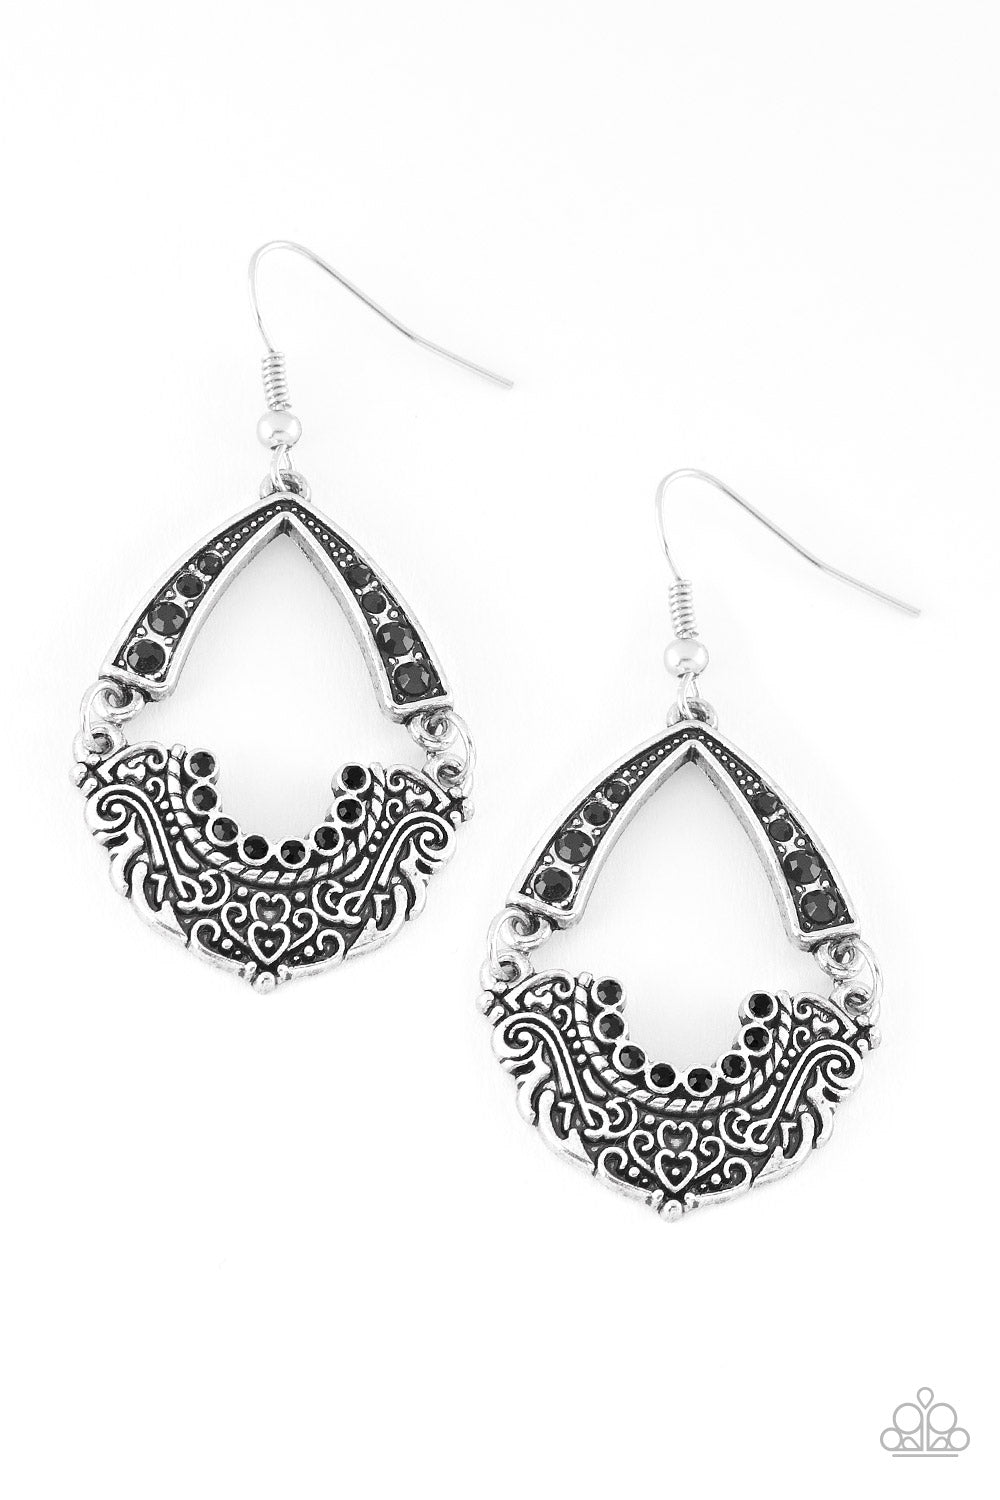 Paparazzi Accessories Royal Engagement - Black Earring - Be Adored Jewelry